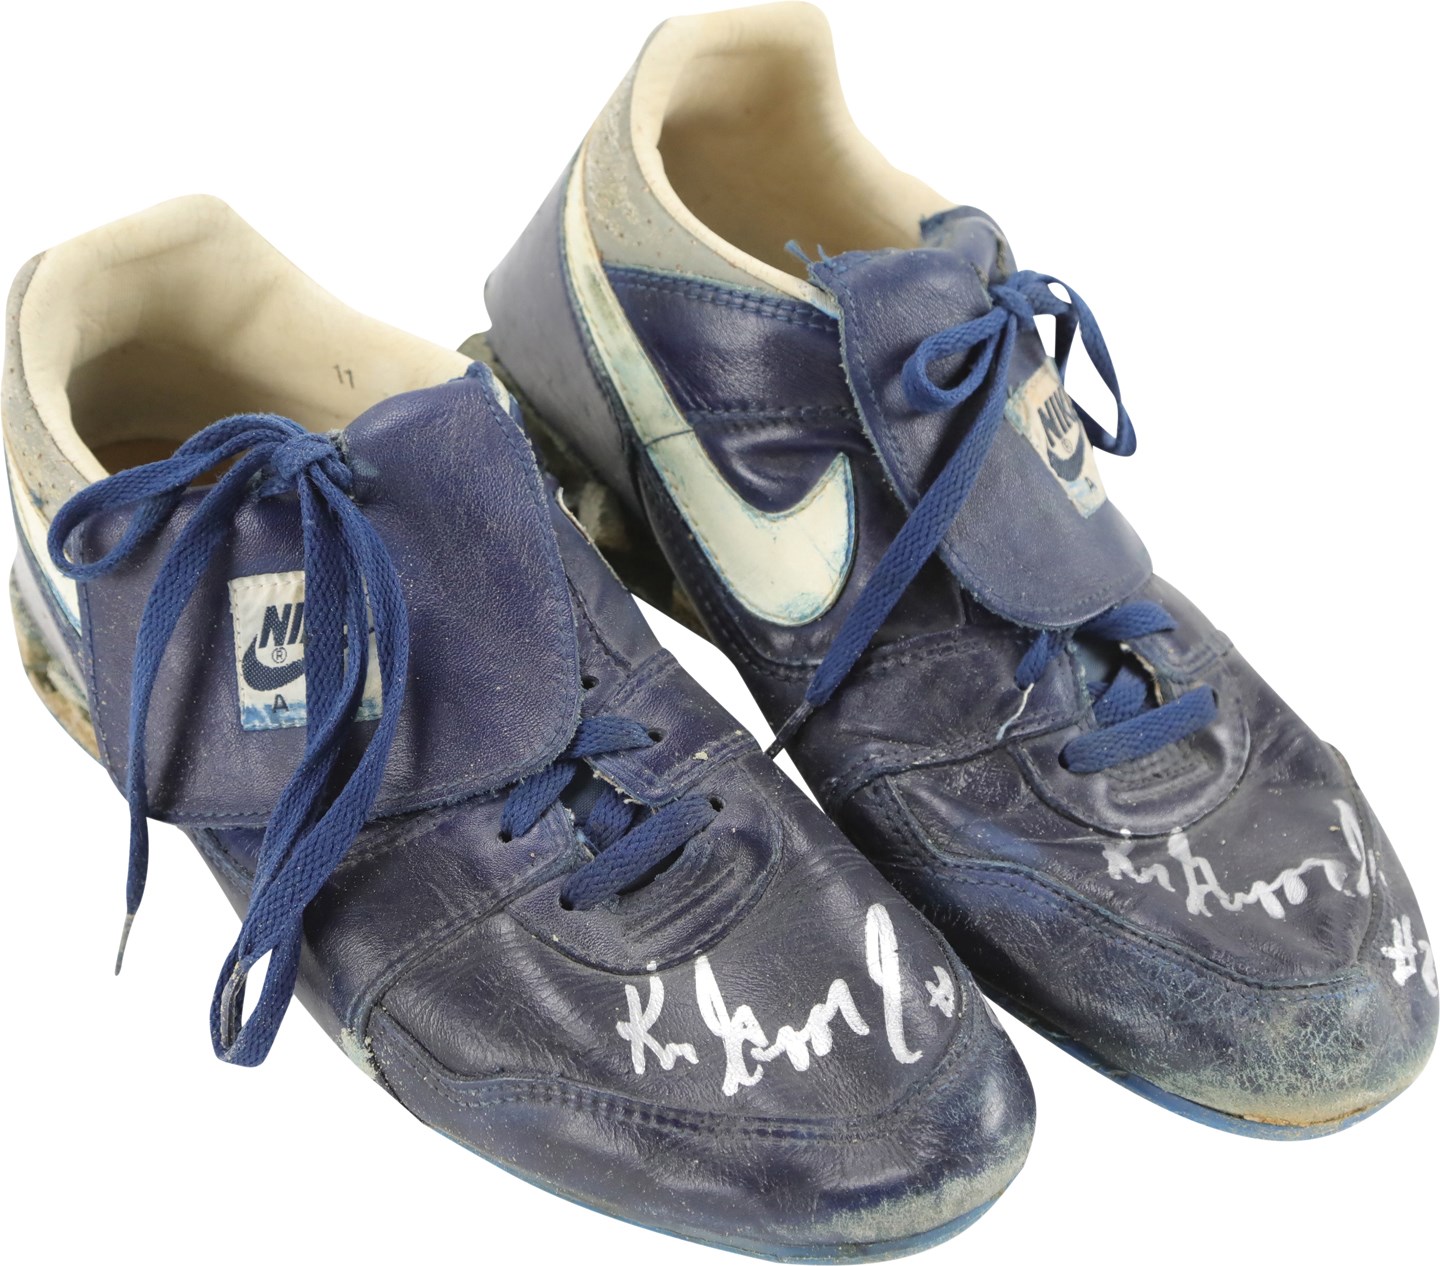 Baseball Equipment - 1989 Ken Griffey Jr. Seattle Mariners Rookie Signed Game Used Cleats (Griffey Jr. COA & PSA)